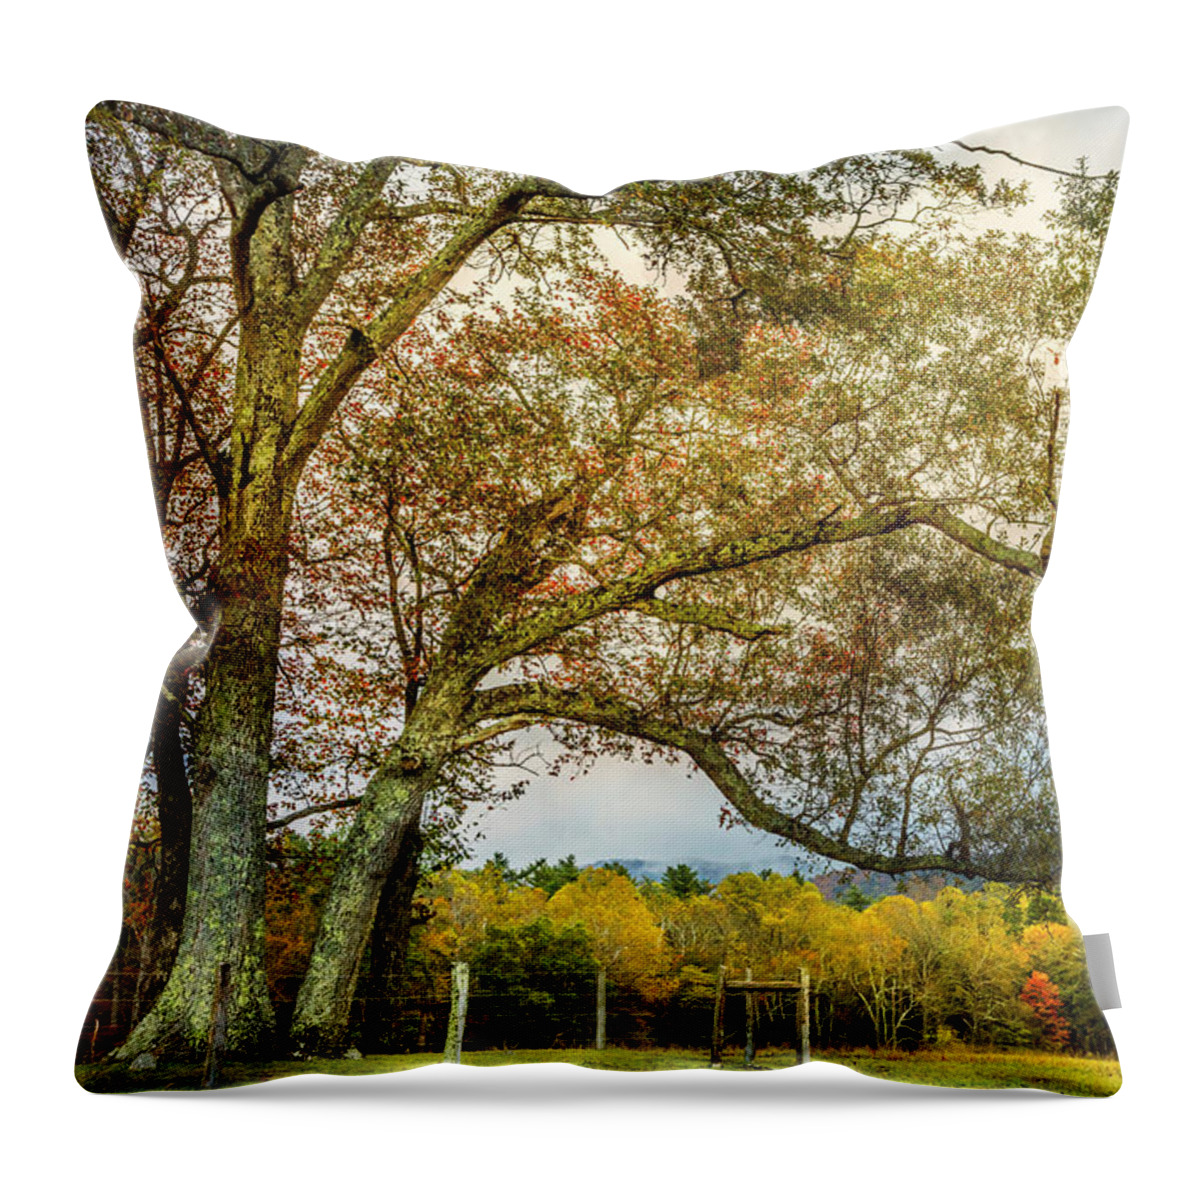 Appalachia Throw Pillow featuring the photograph Country Mountain Lane at Cades Cove by Debra and Dave Vanderlaan